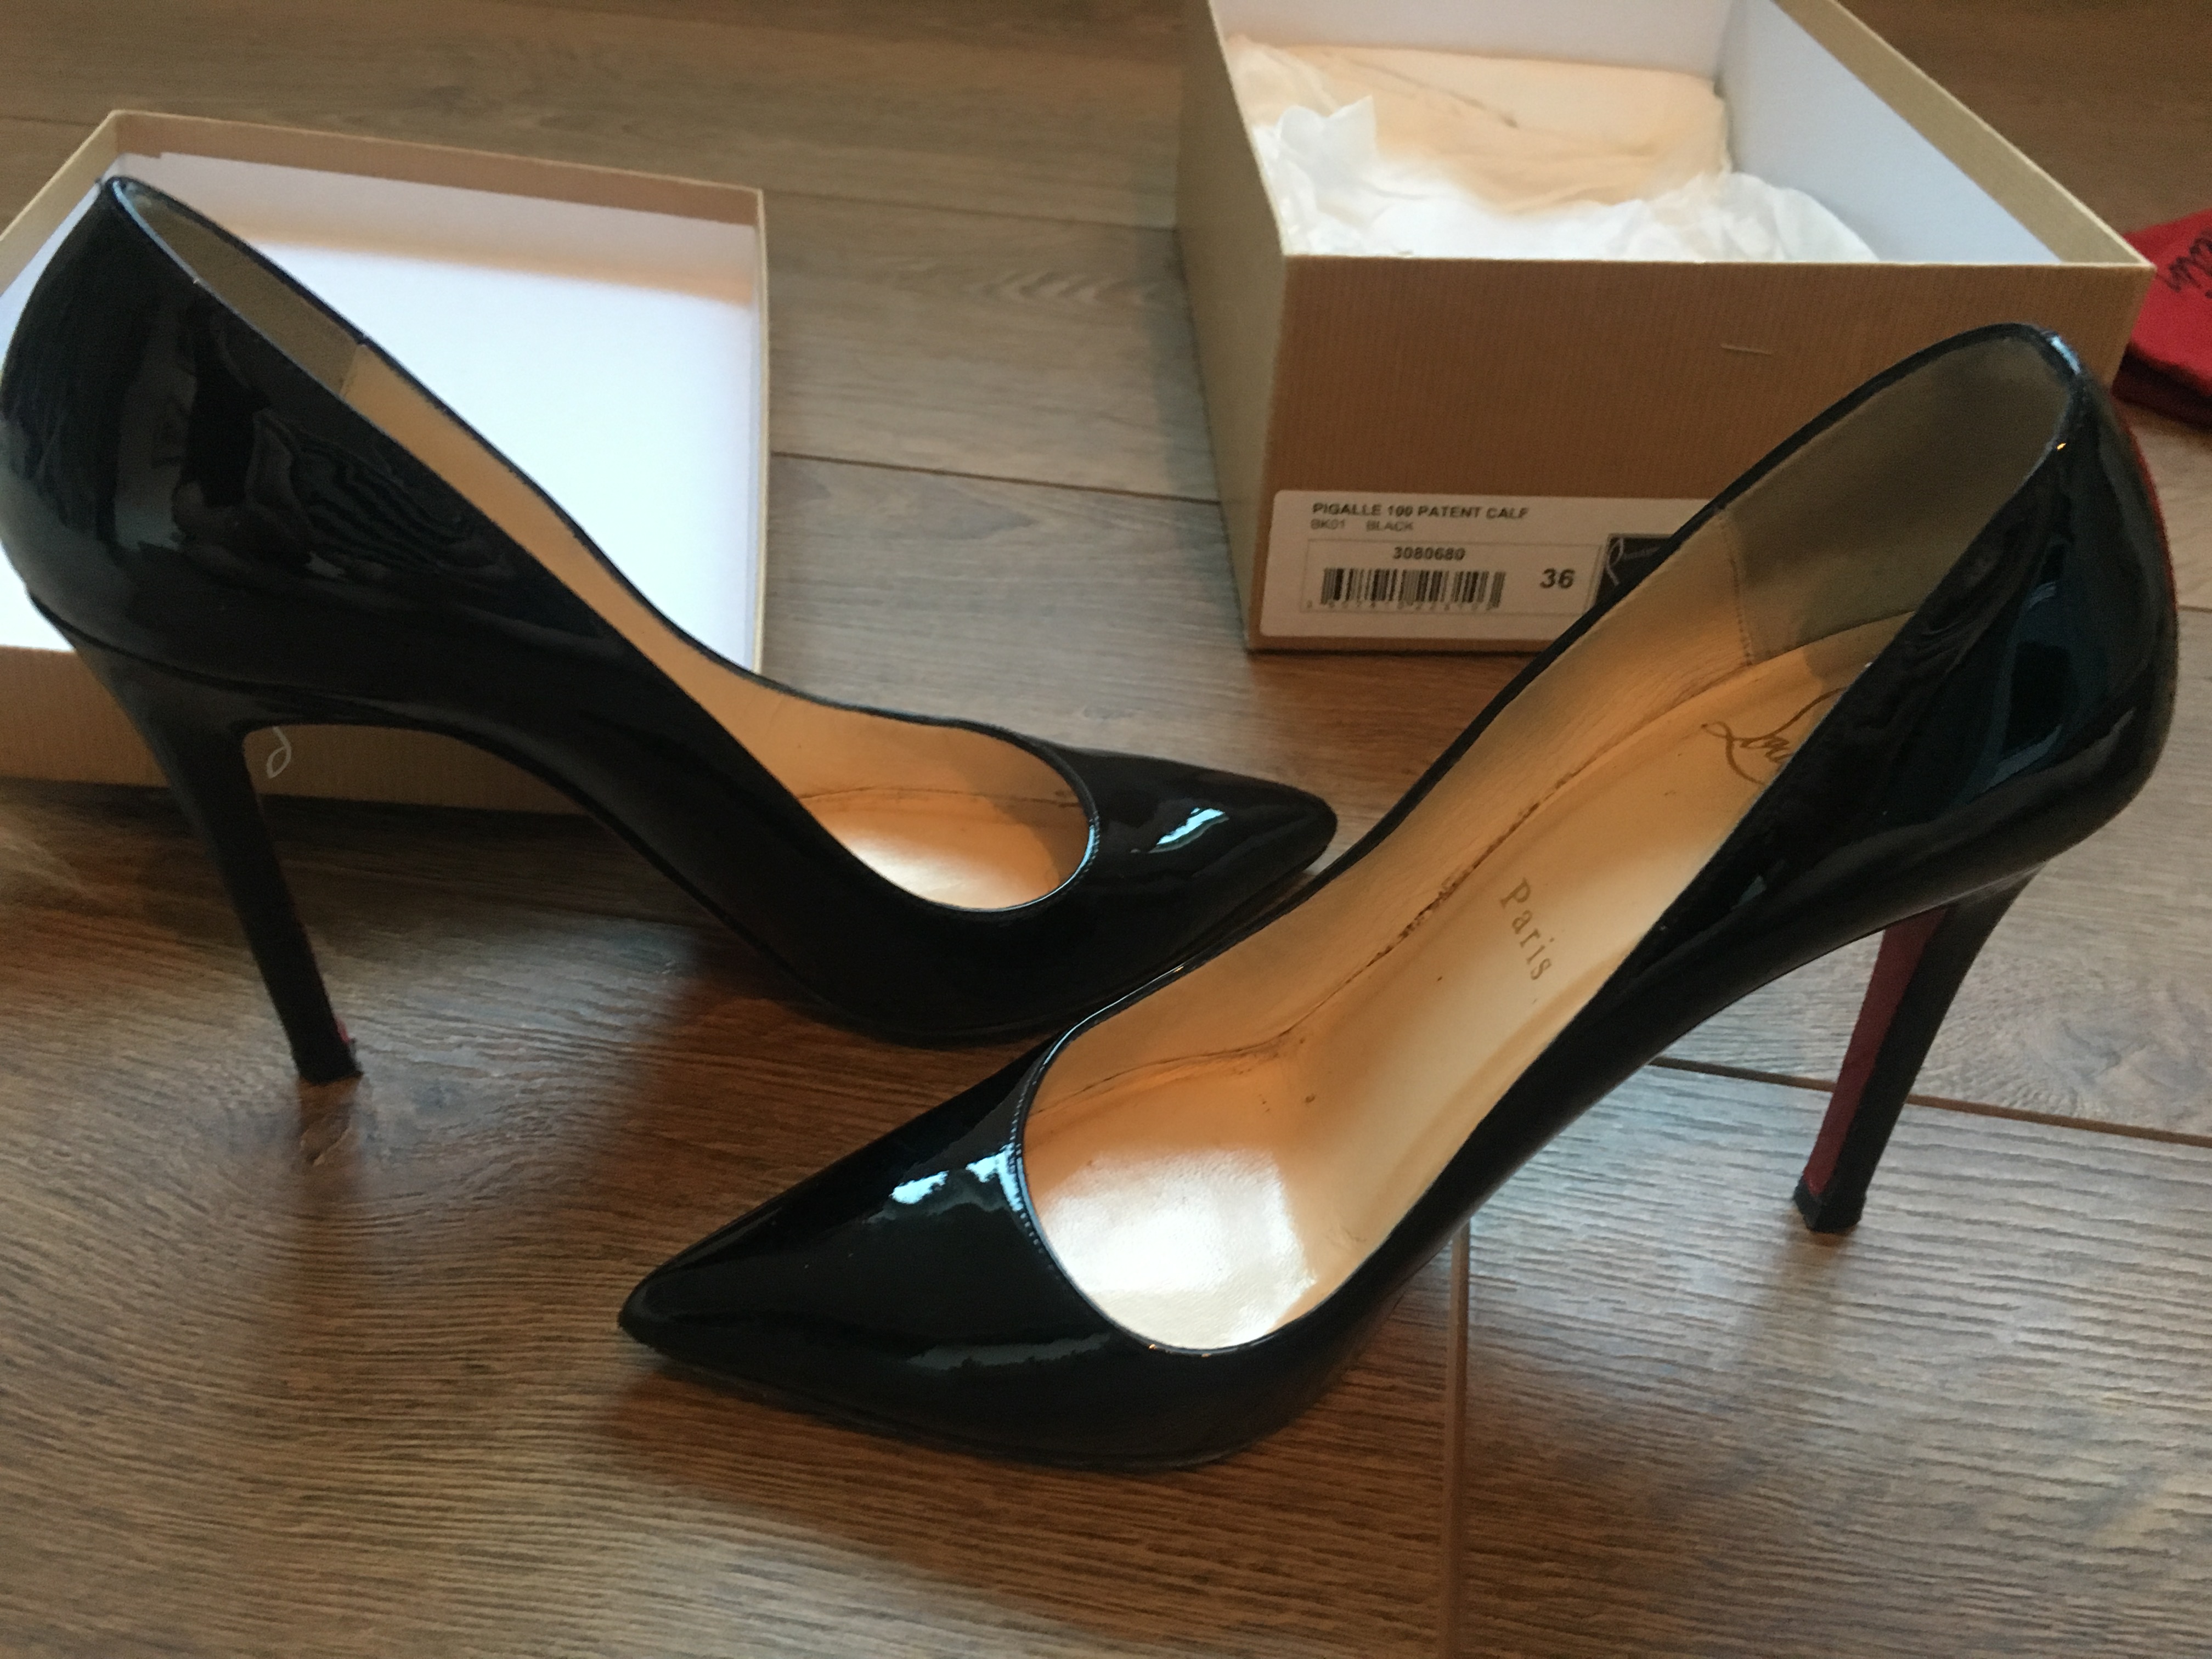 Christian Louboutin Pigalle 100 Patent 